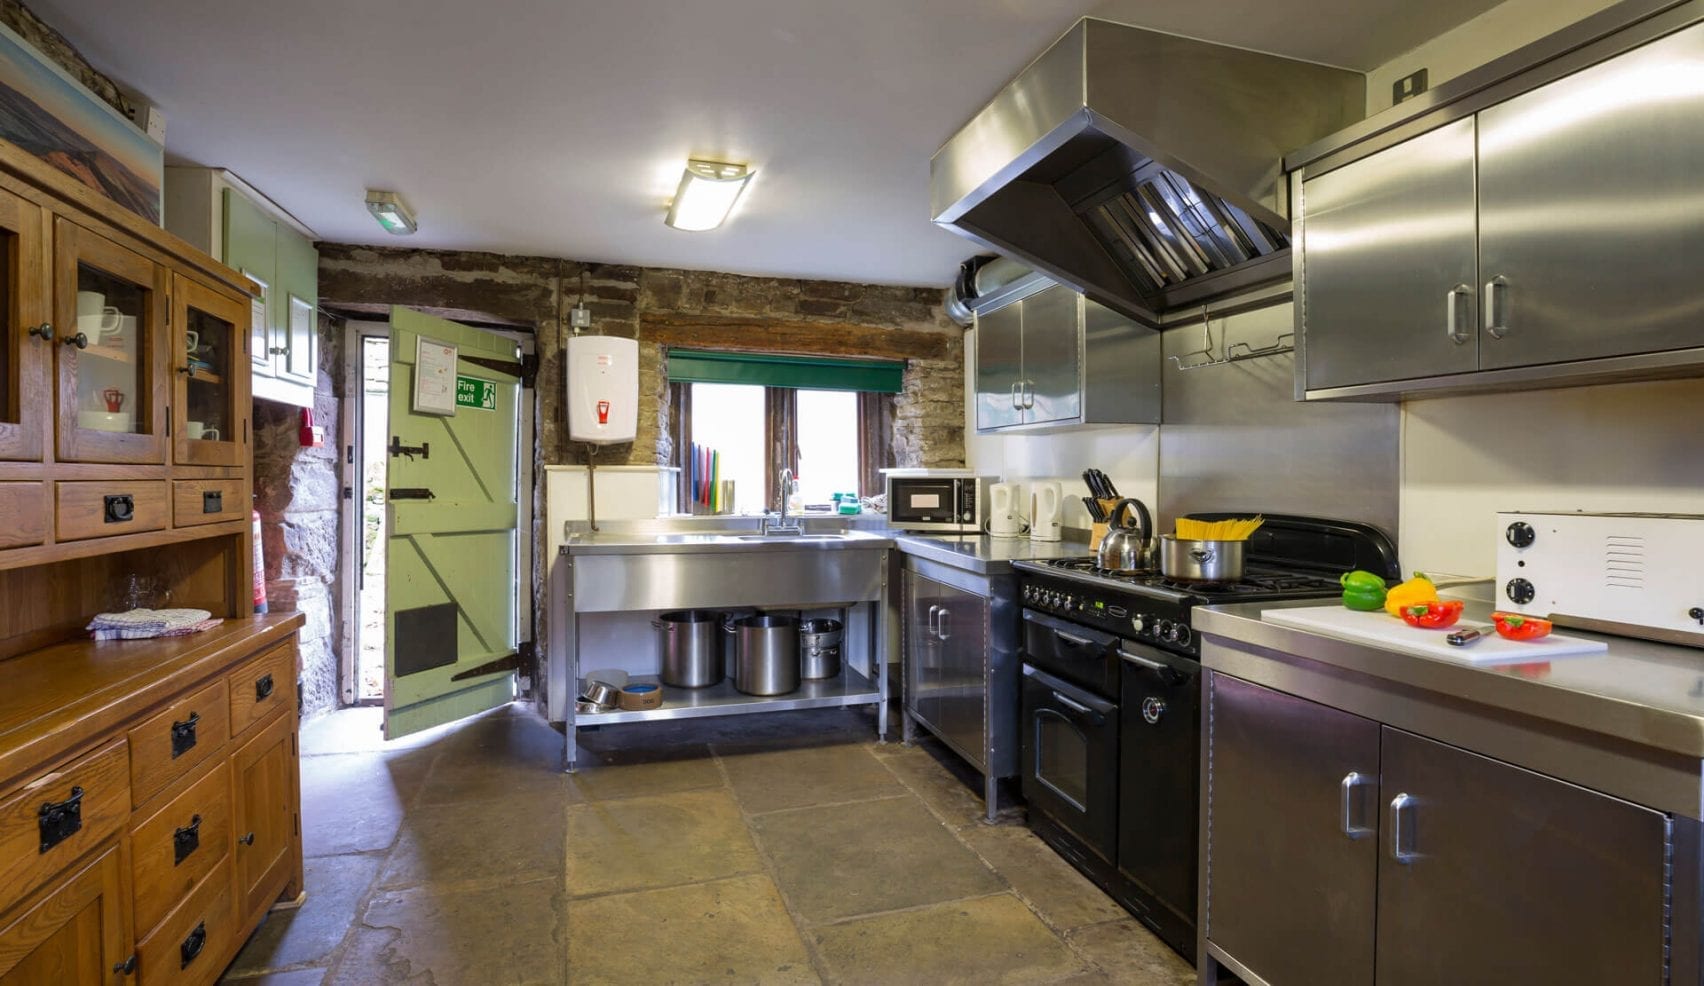 Kitchen area of the Dalehead Bunkhouse